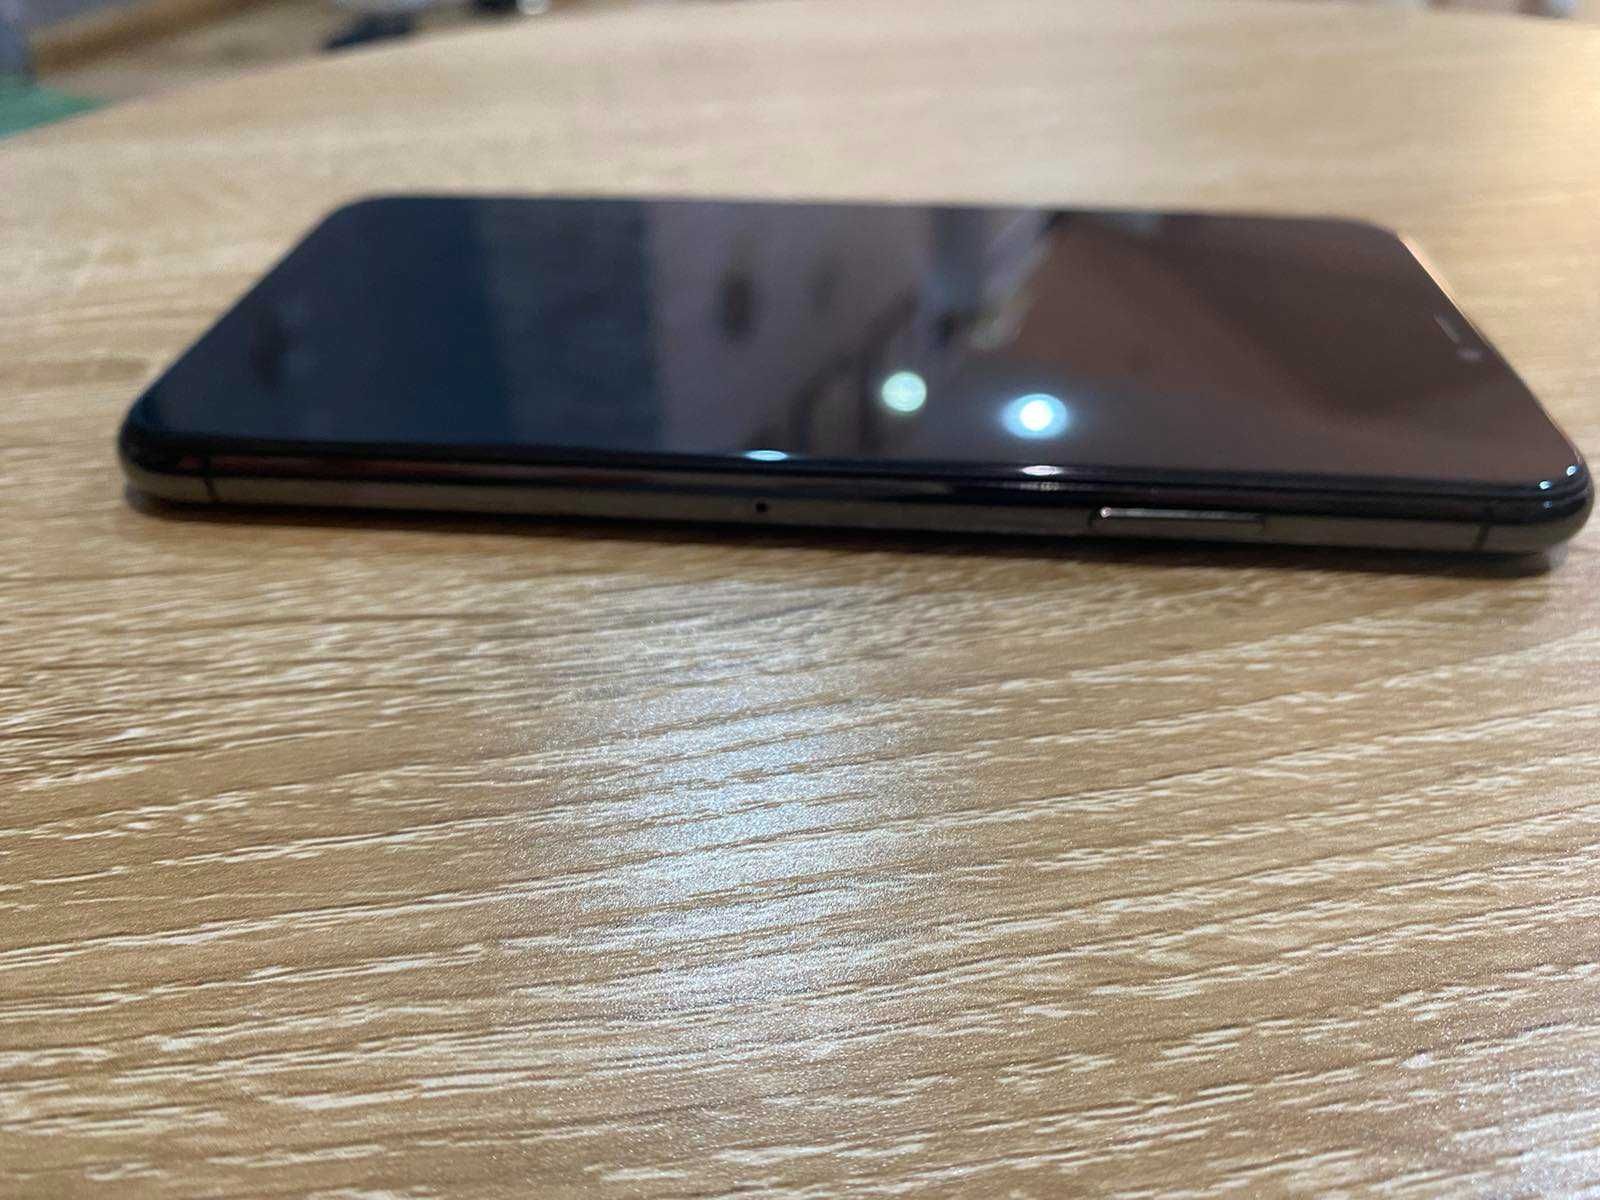 IPhone 11 Pro Max Space grey